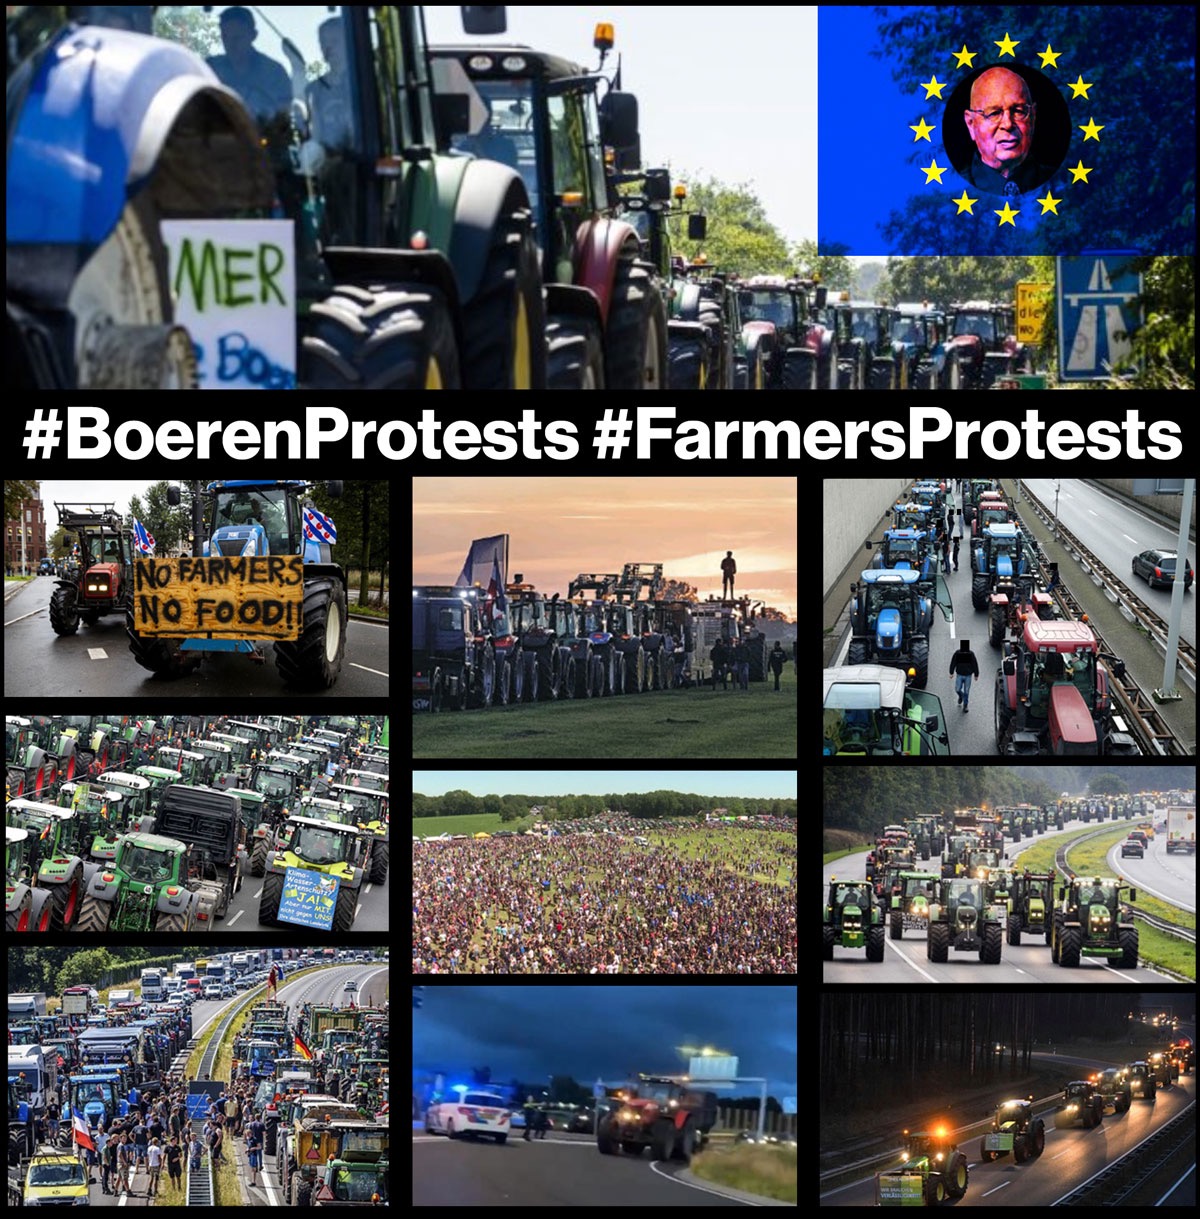 Farmers Protests in The Netherlands …